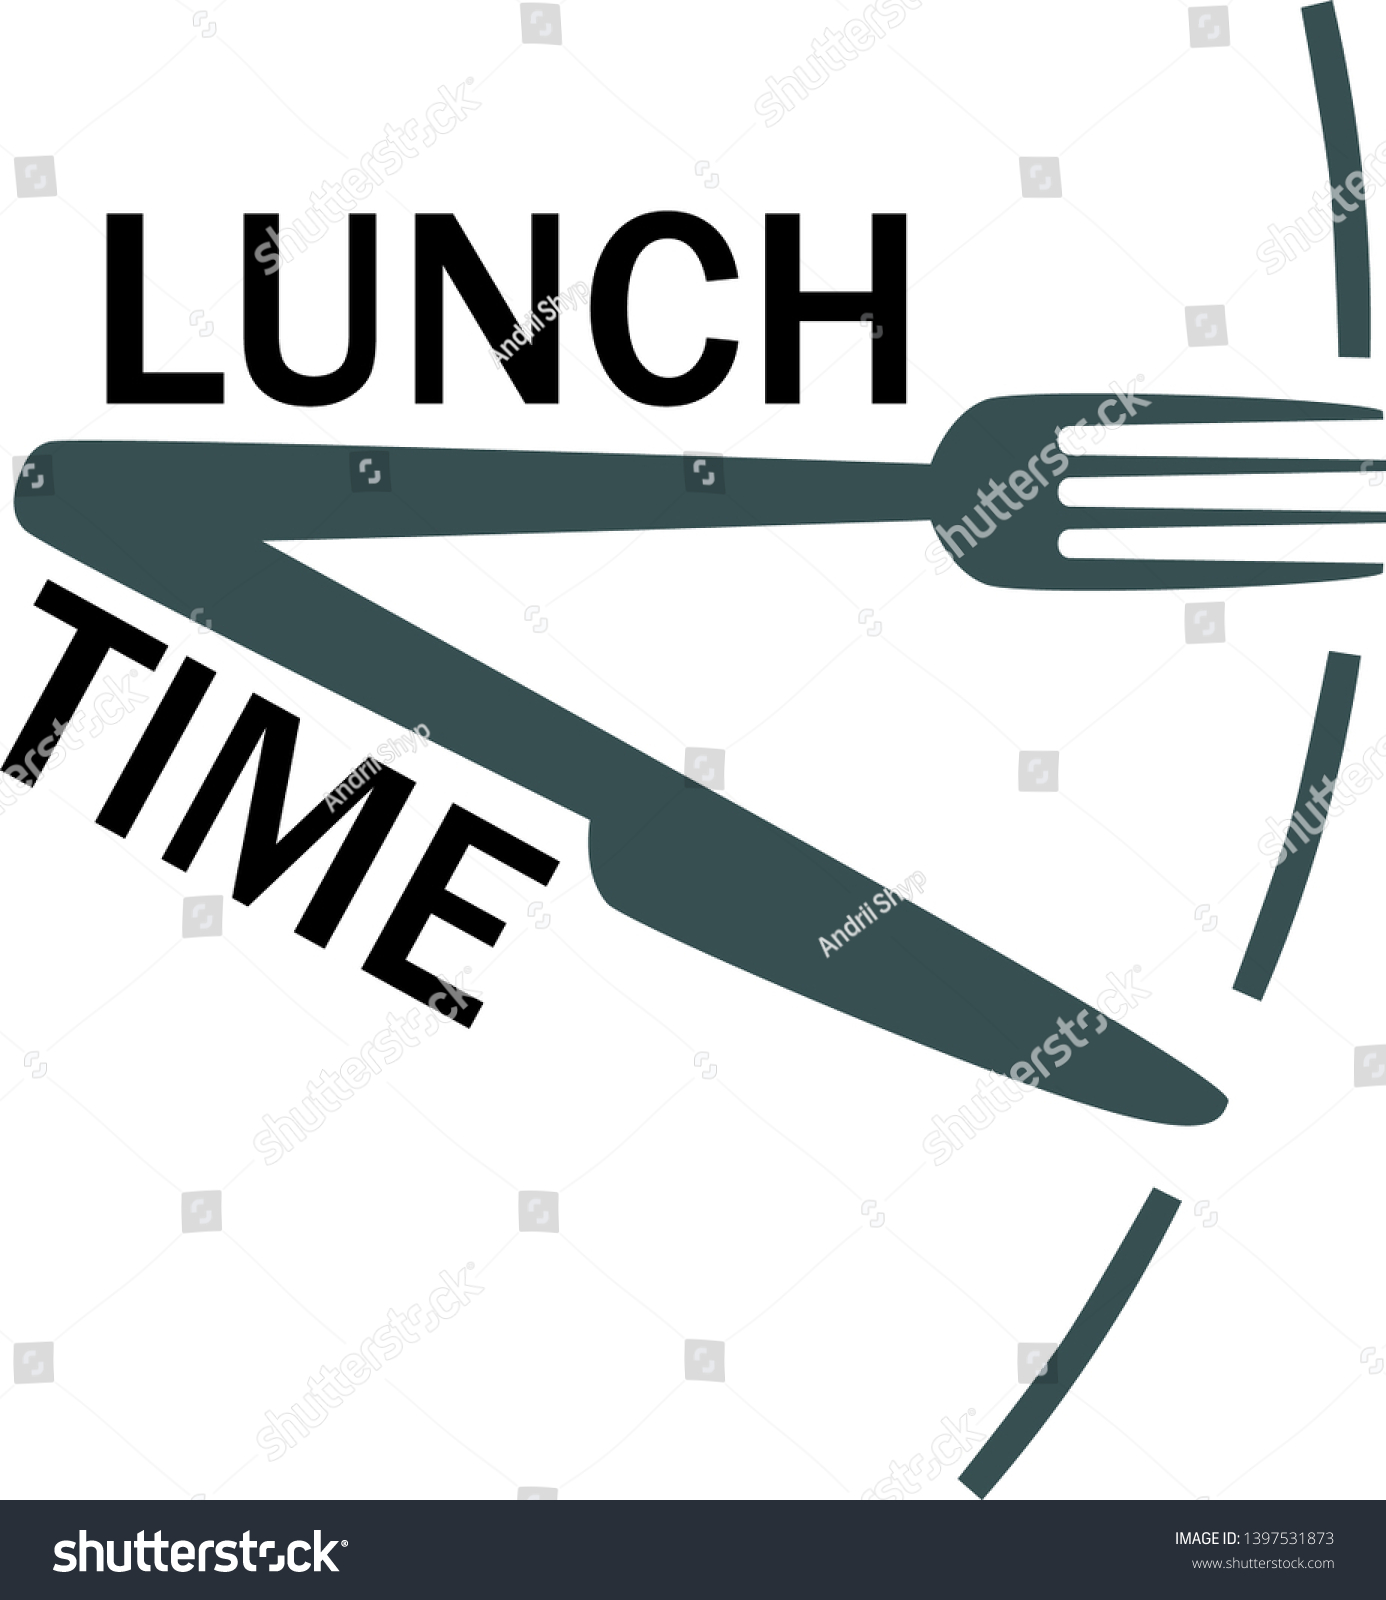 Lunch time, meal text with fork and knife. Isolated icon. Lunch break. Fork knife as clock hands. Flat vector illustration.